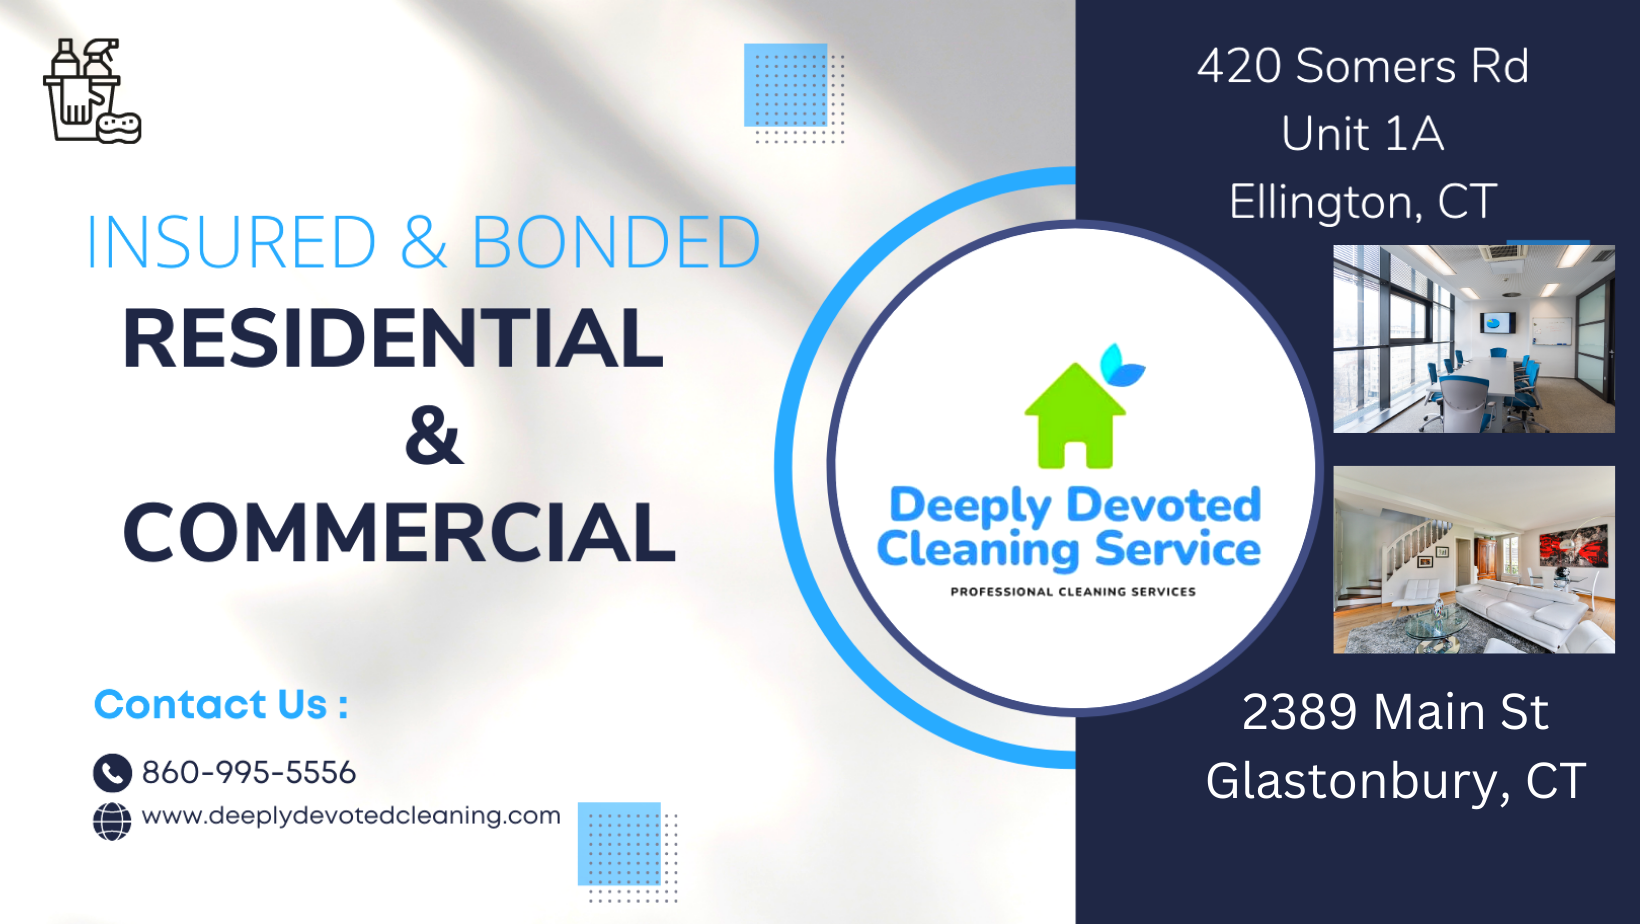 Deeply Devoted Cleaning Service reviews | 420 Somers Rd - Ellington CT